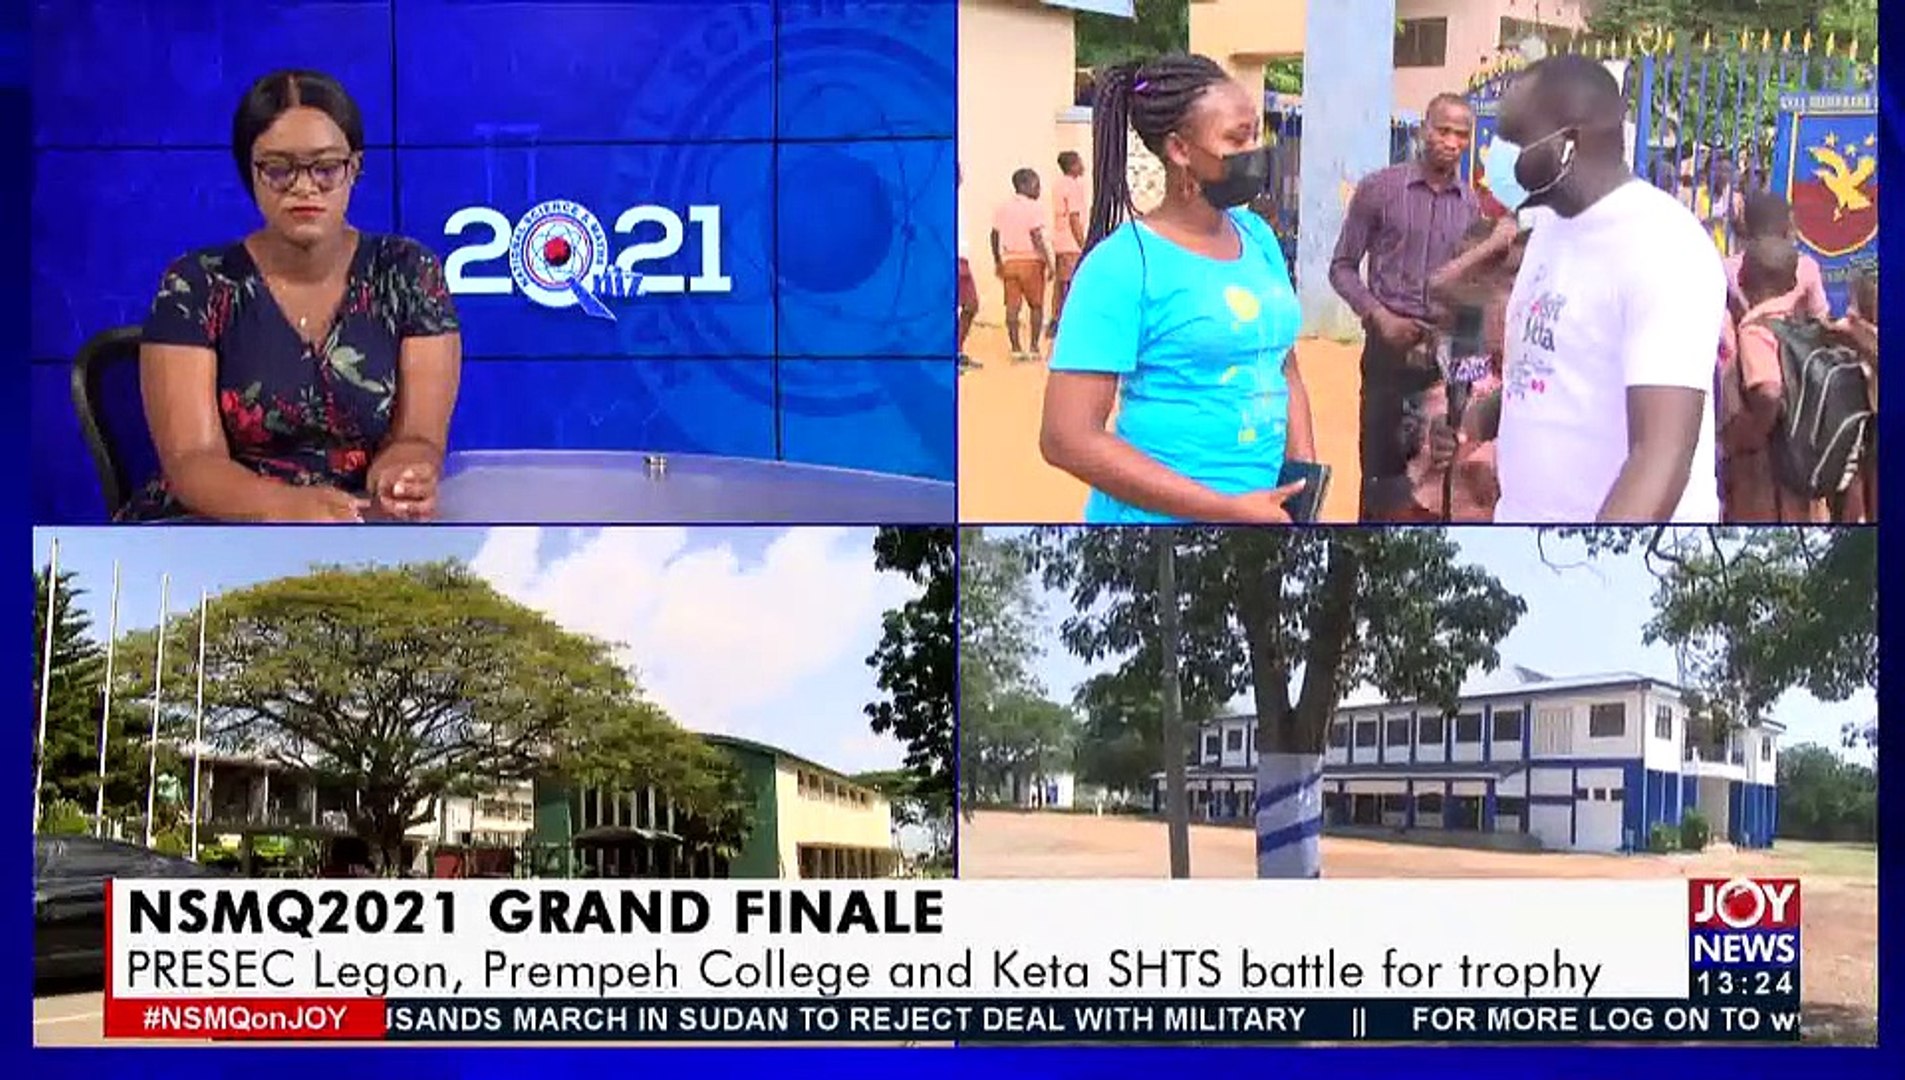 NSMQ2021 Grand Finale: PRESEC Legon, Prempeh College and Keta SHTS battle  for trophy (26-11-21) - video Dailymotion